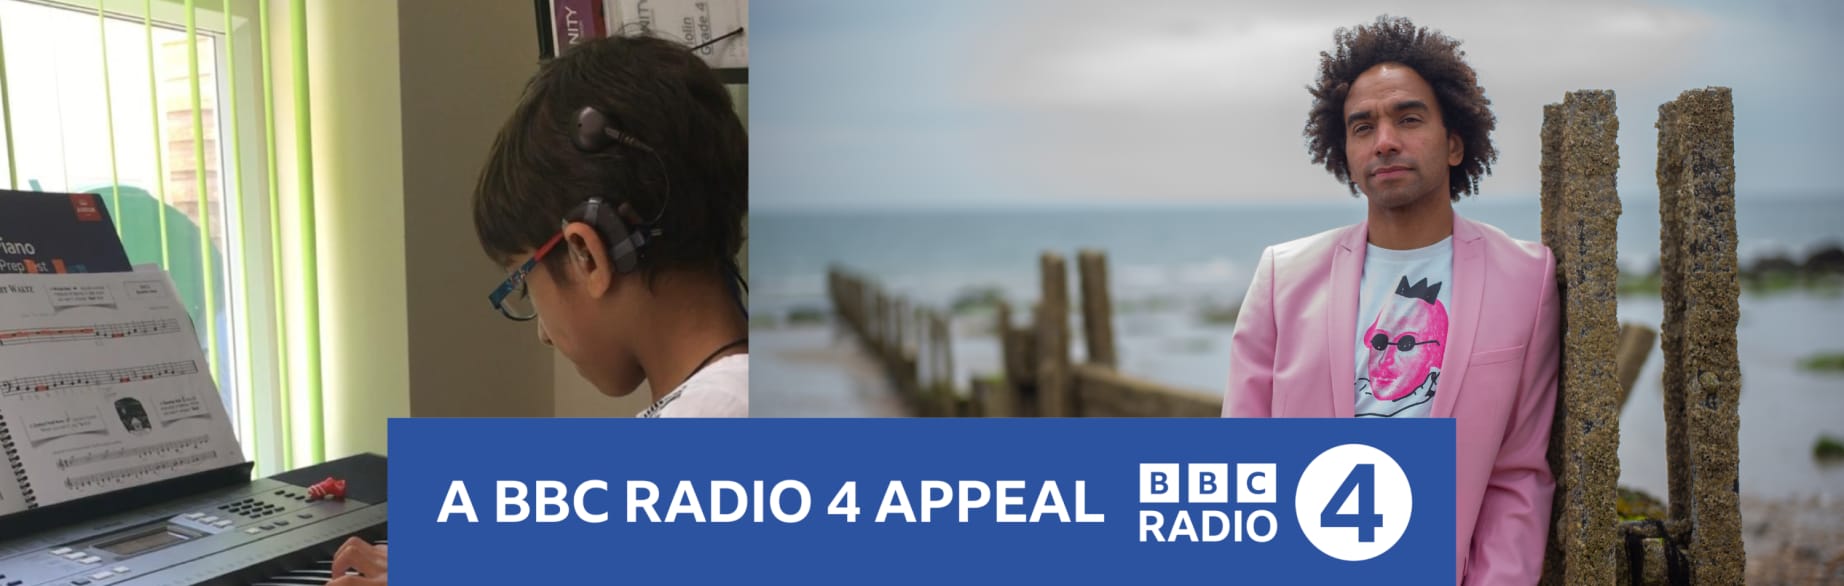 Auditory Verbal UK launch BBC Radio 4 appeal